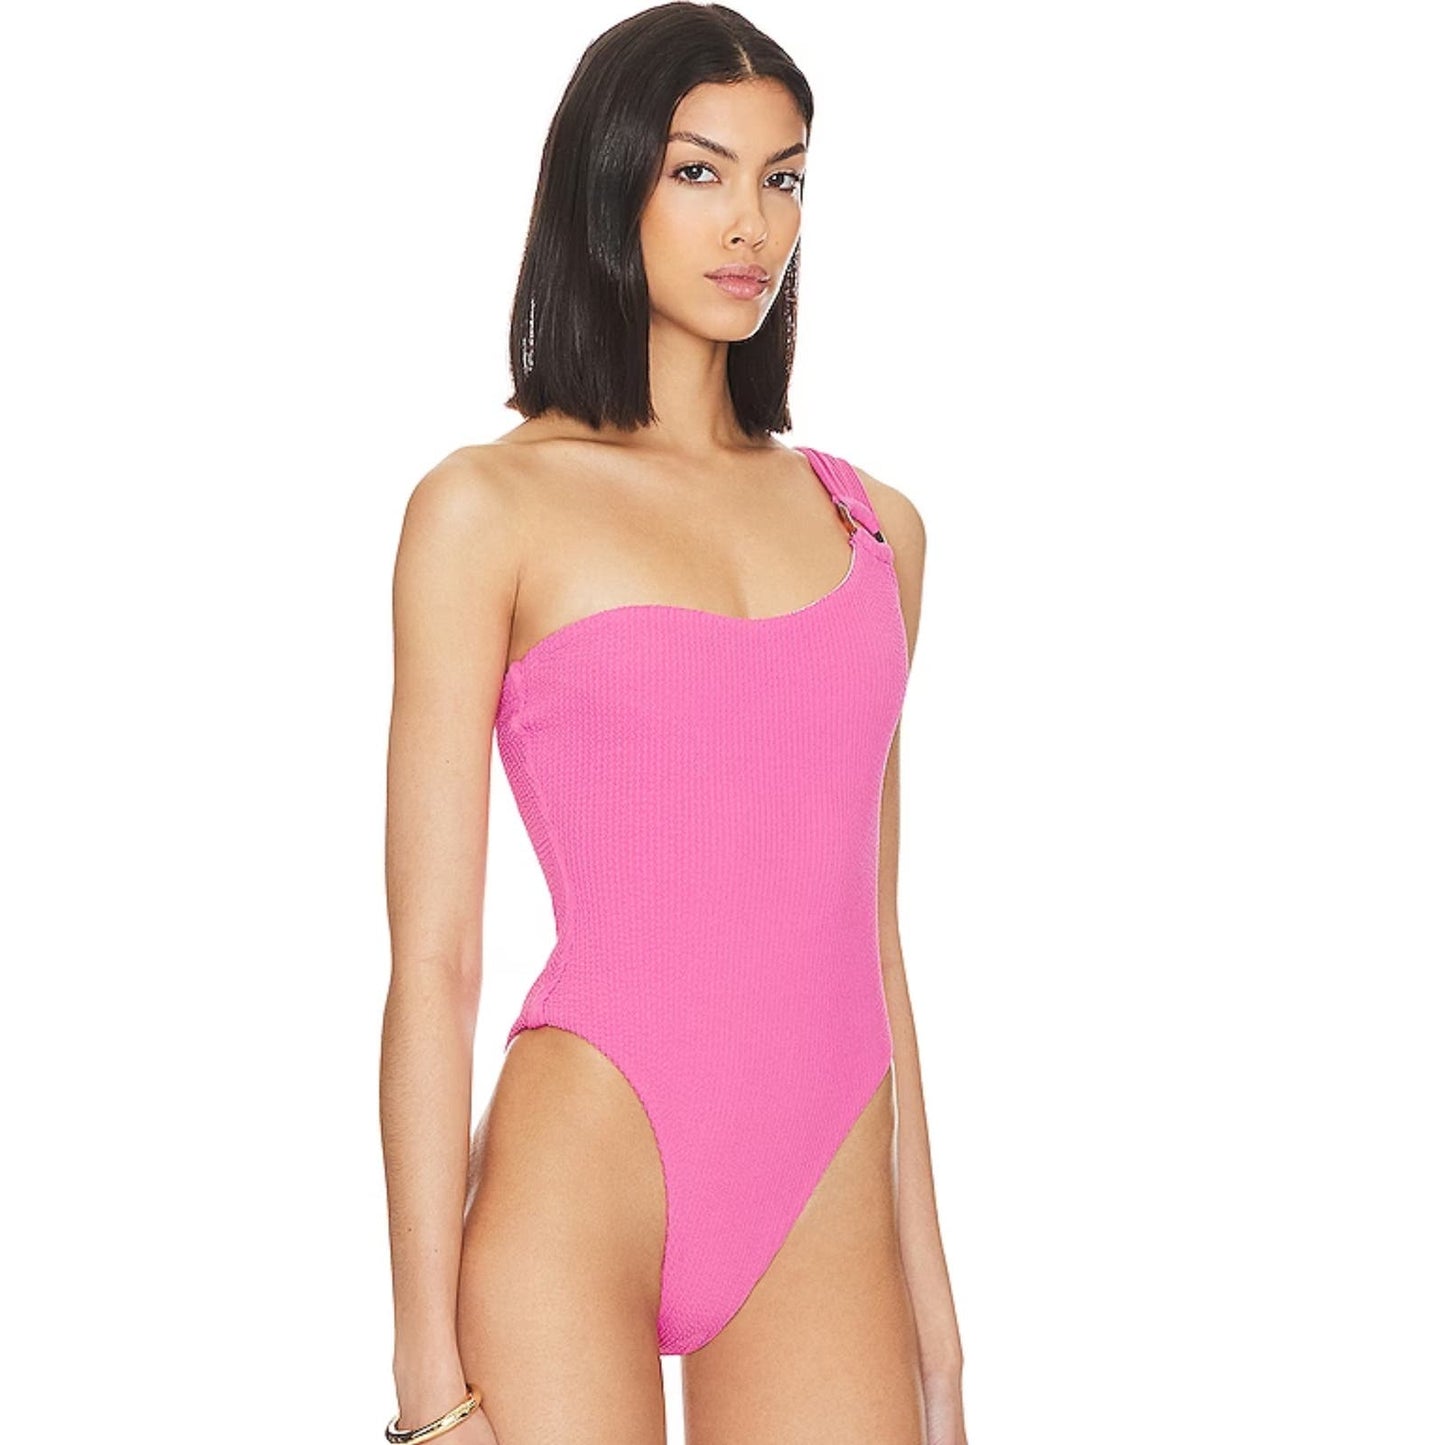 MORE TO COME Manaia One Piece in Pink NWT Size Medium